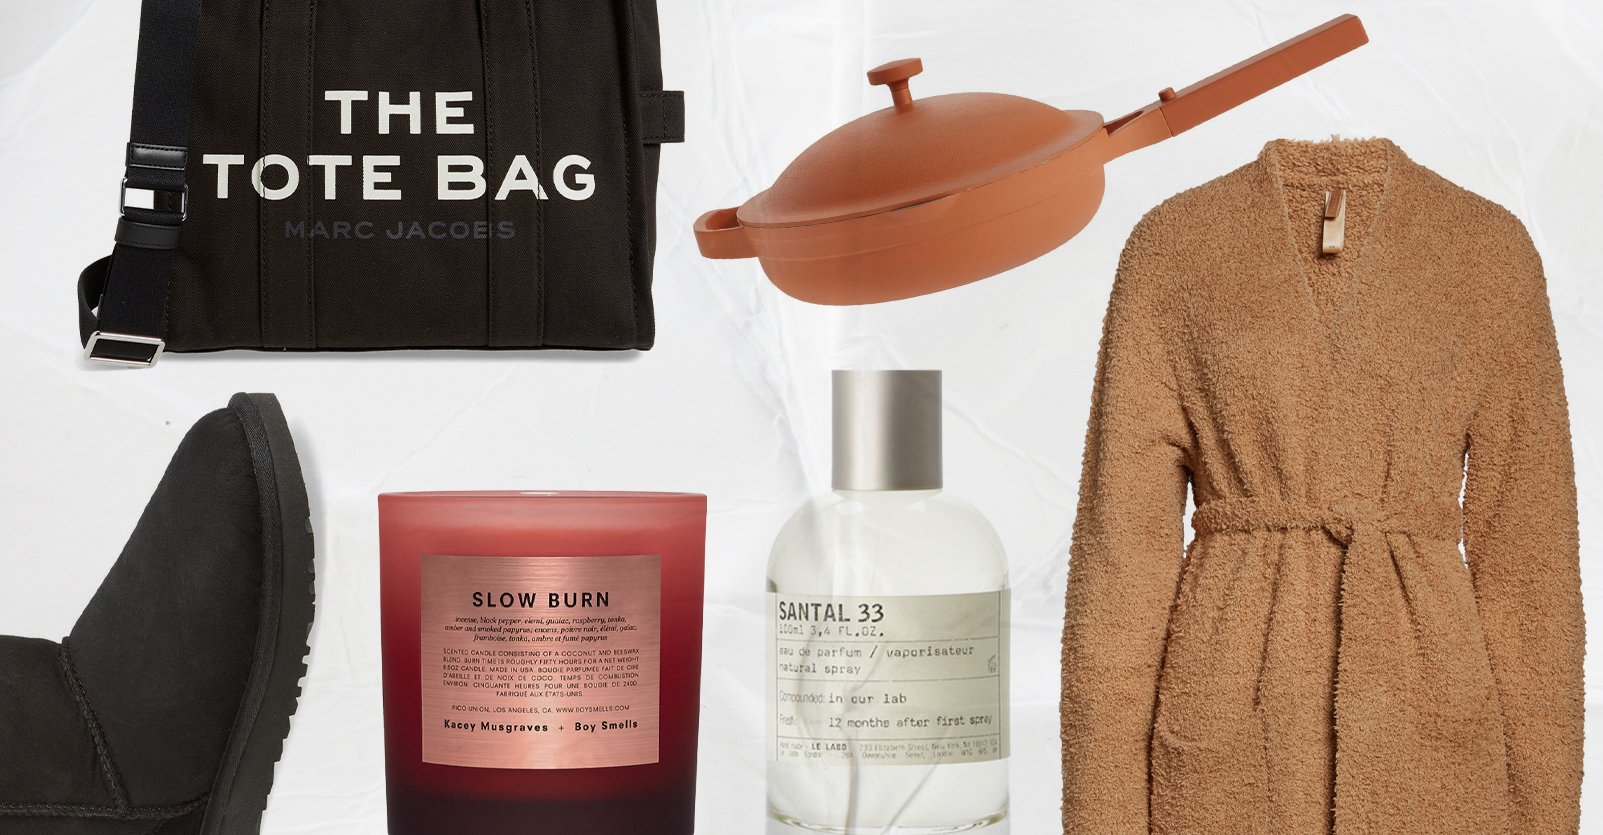 The 47 Best Gifts to Buy At Nordstrom—From Small Surprises to Big Splurges